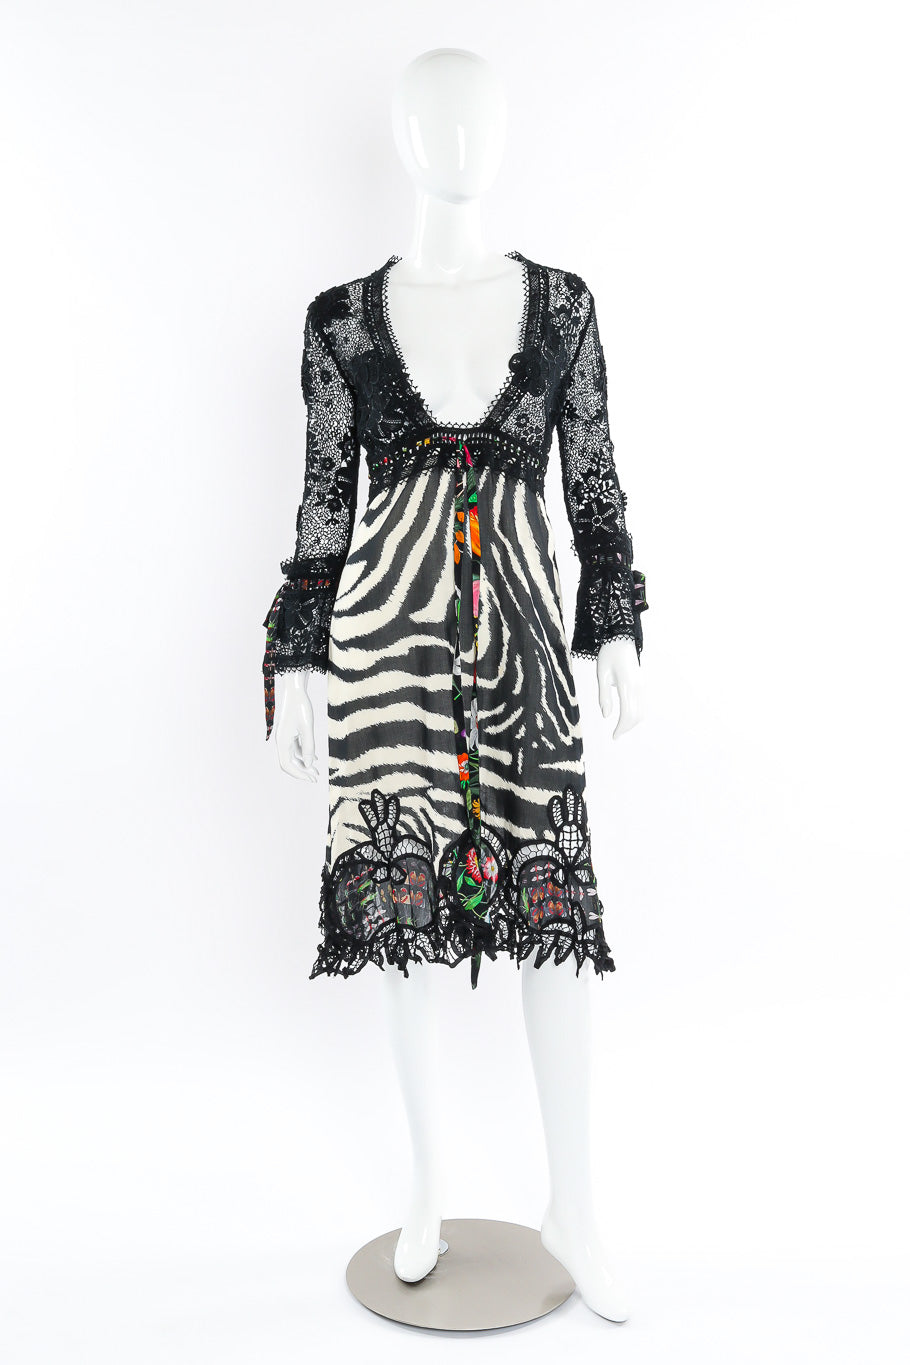 Lace and zebra print dress by Tom Ford for Gucci Mannequin photo. @recessla